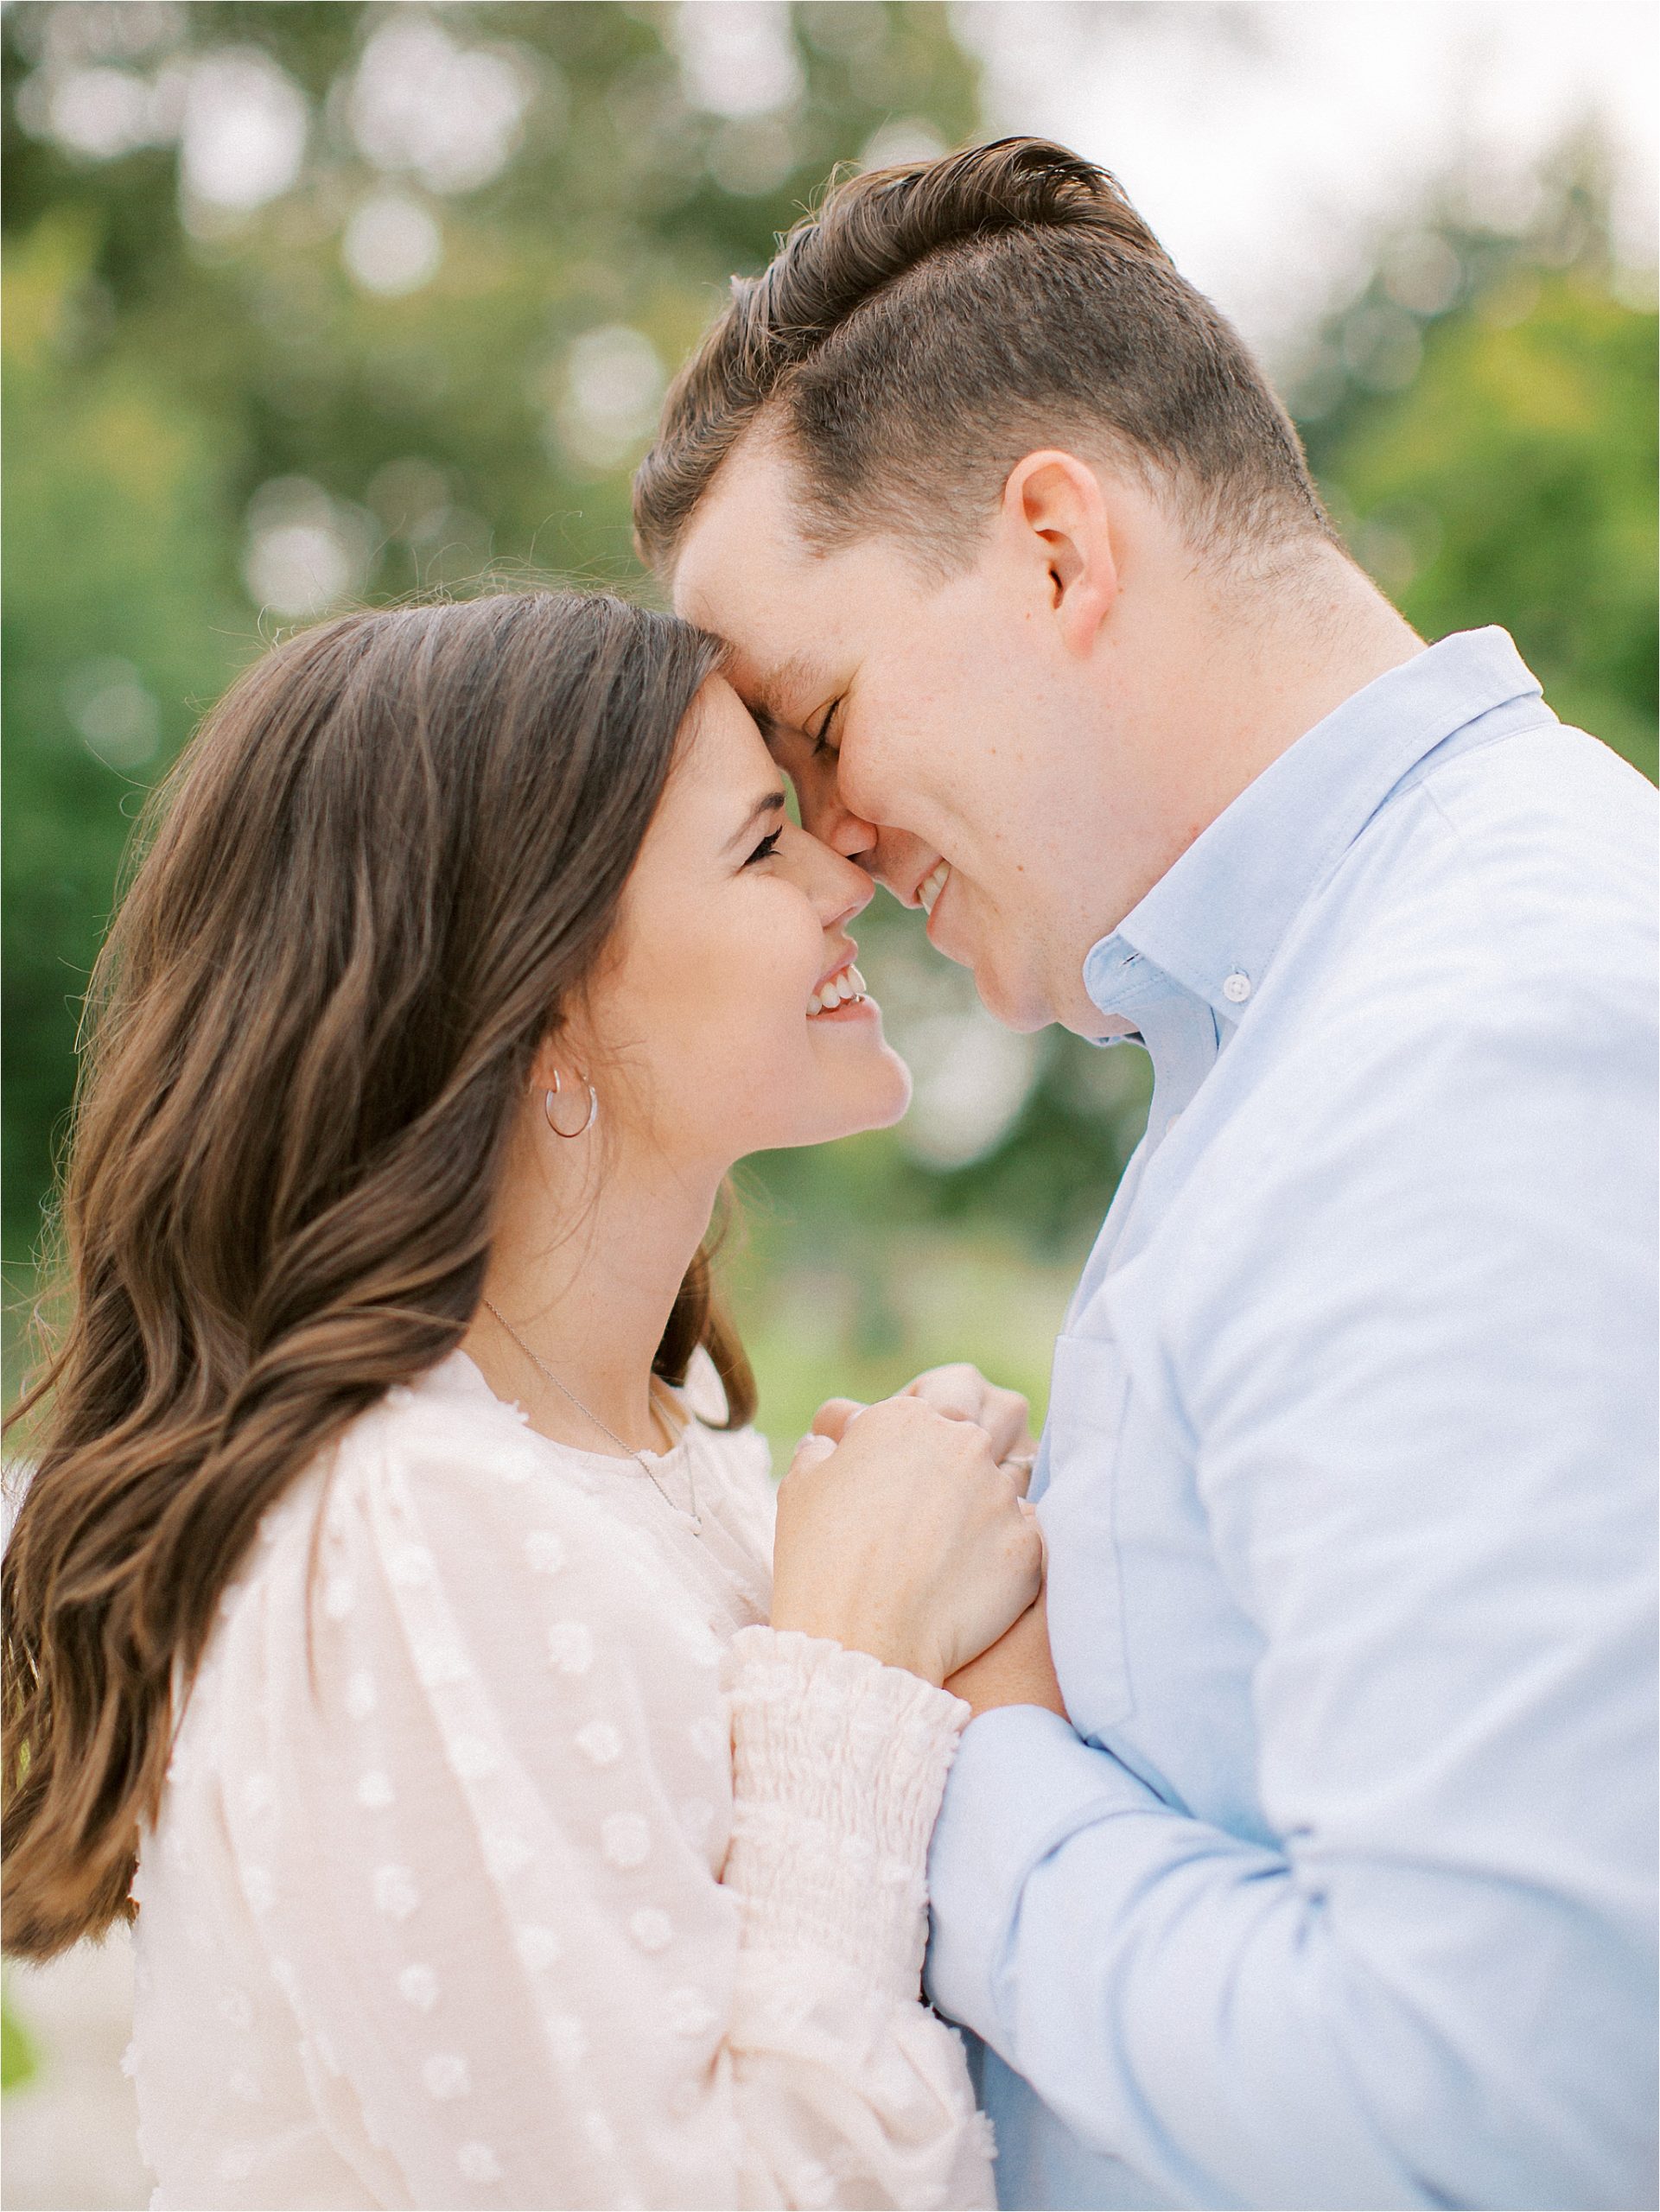 fine art engagement session at the cleveland museum of art |Austin and rachel photography